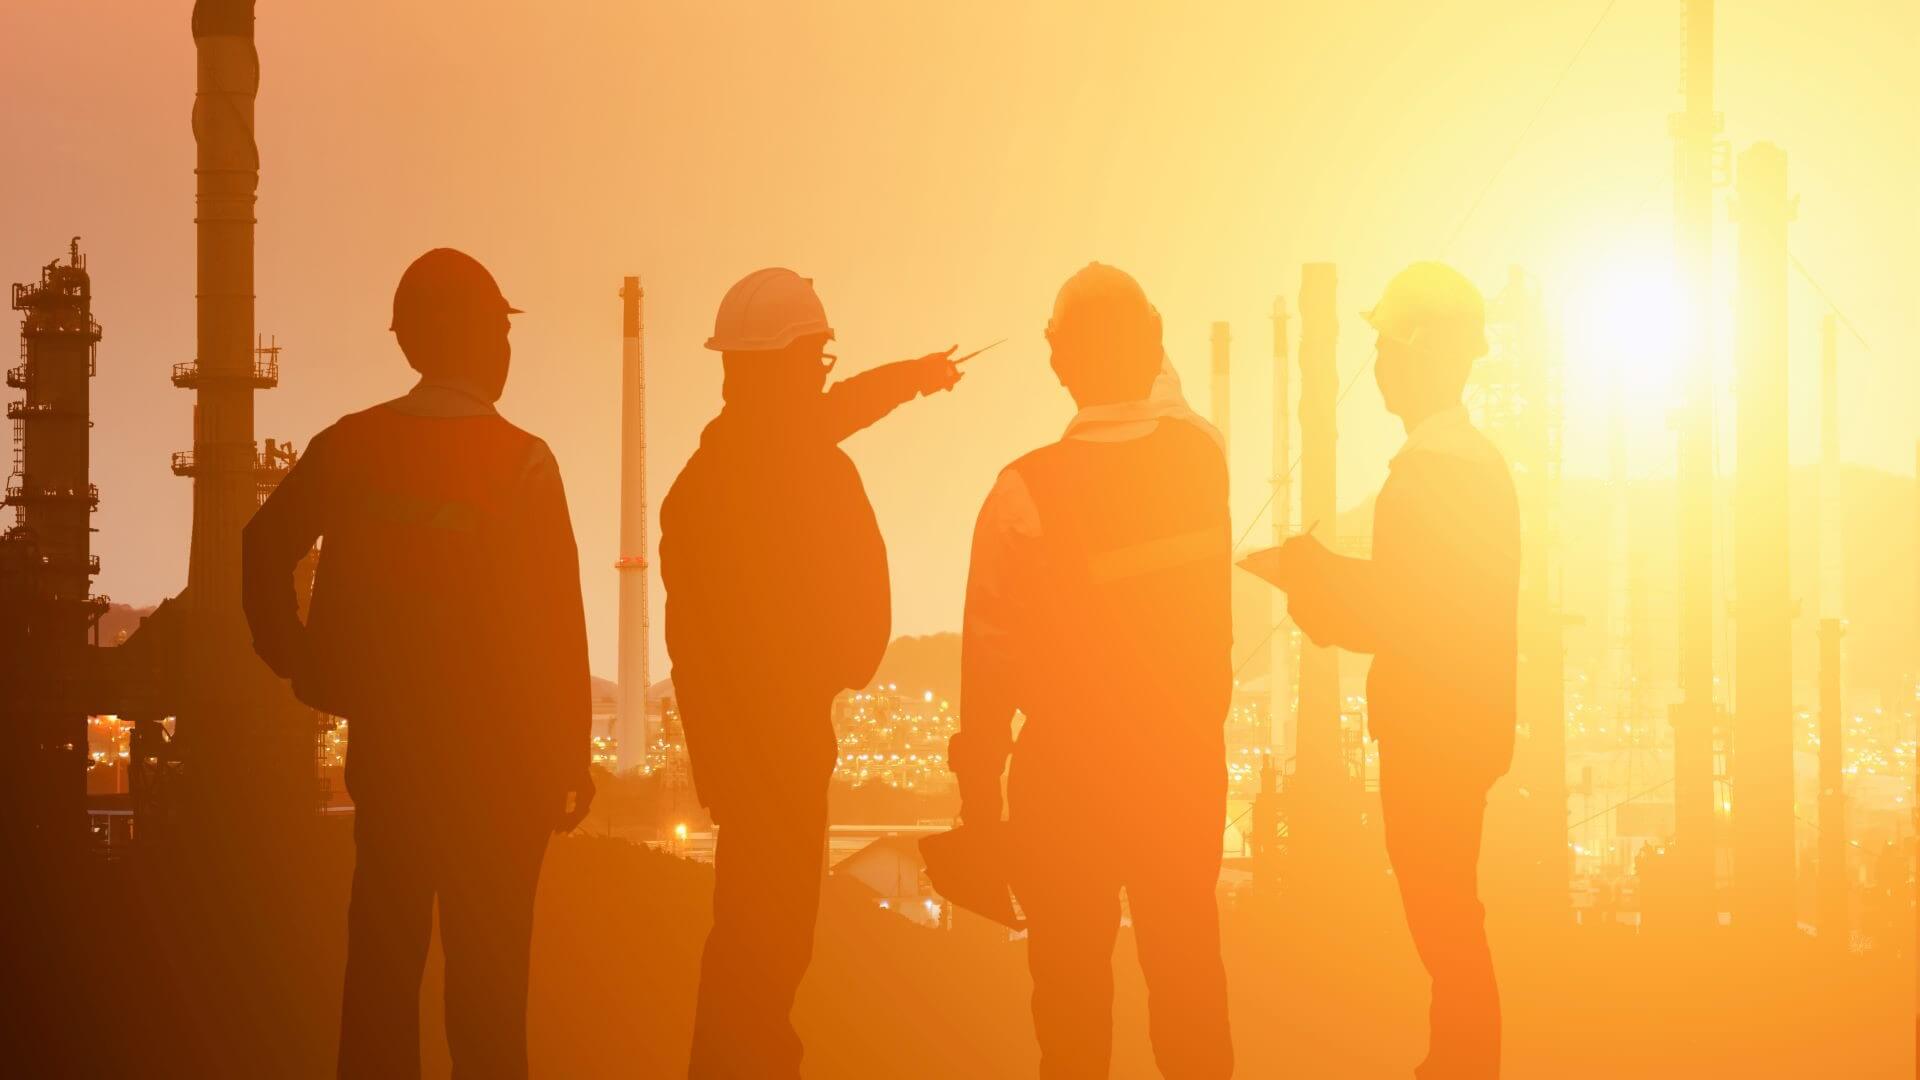 Five engineers in hard hats silhouetted against industrial plant facilities and the setting sun